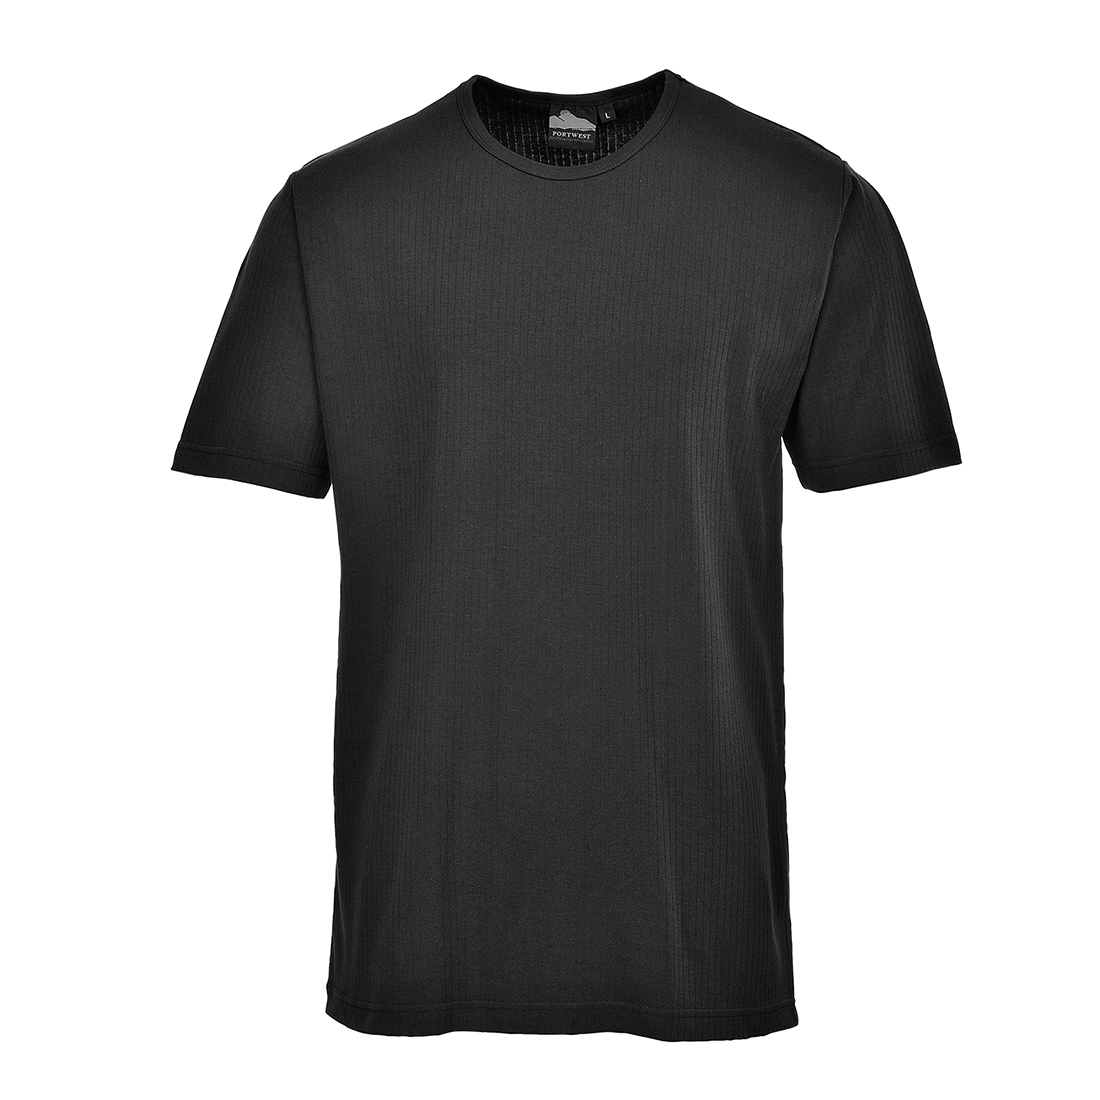 Example image of the short-sleeved thermal shirt B120 in black with a link to the article.